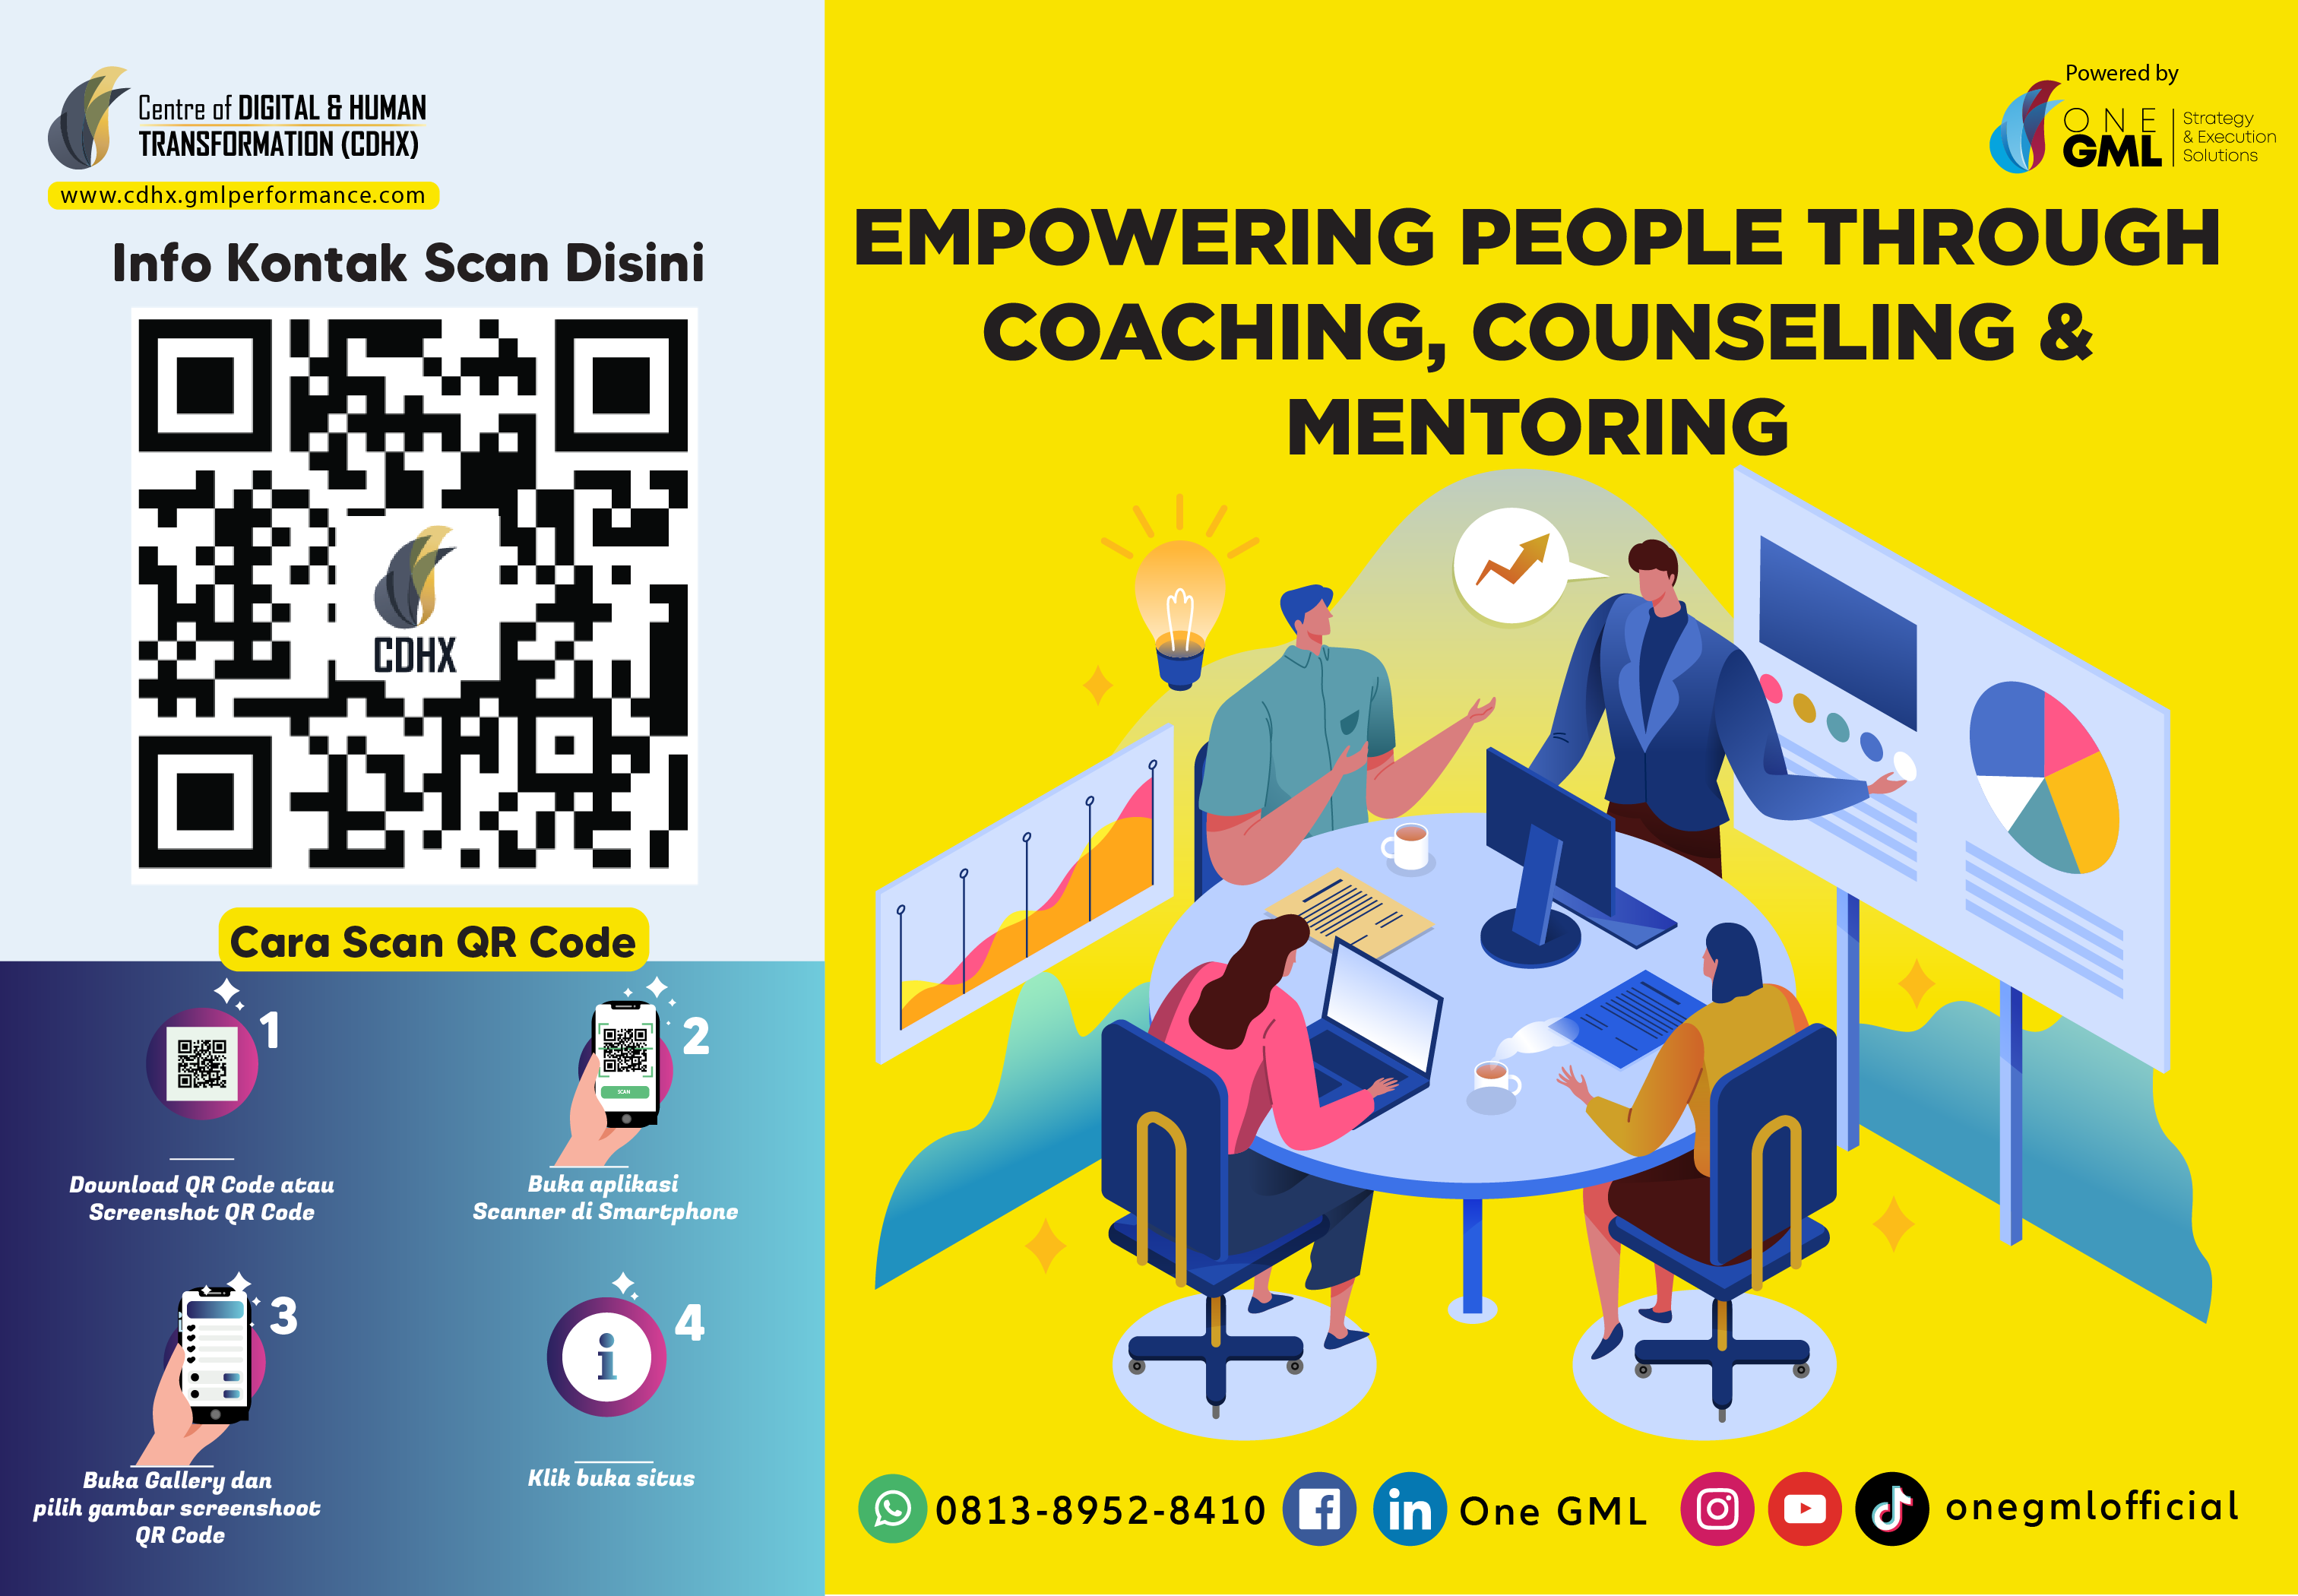 Empowering People through Coaching, Counseling and Mentoring